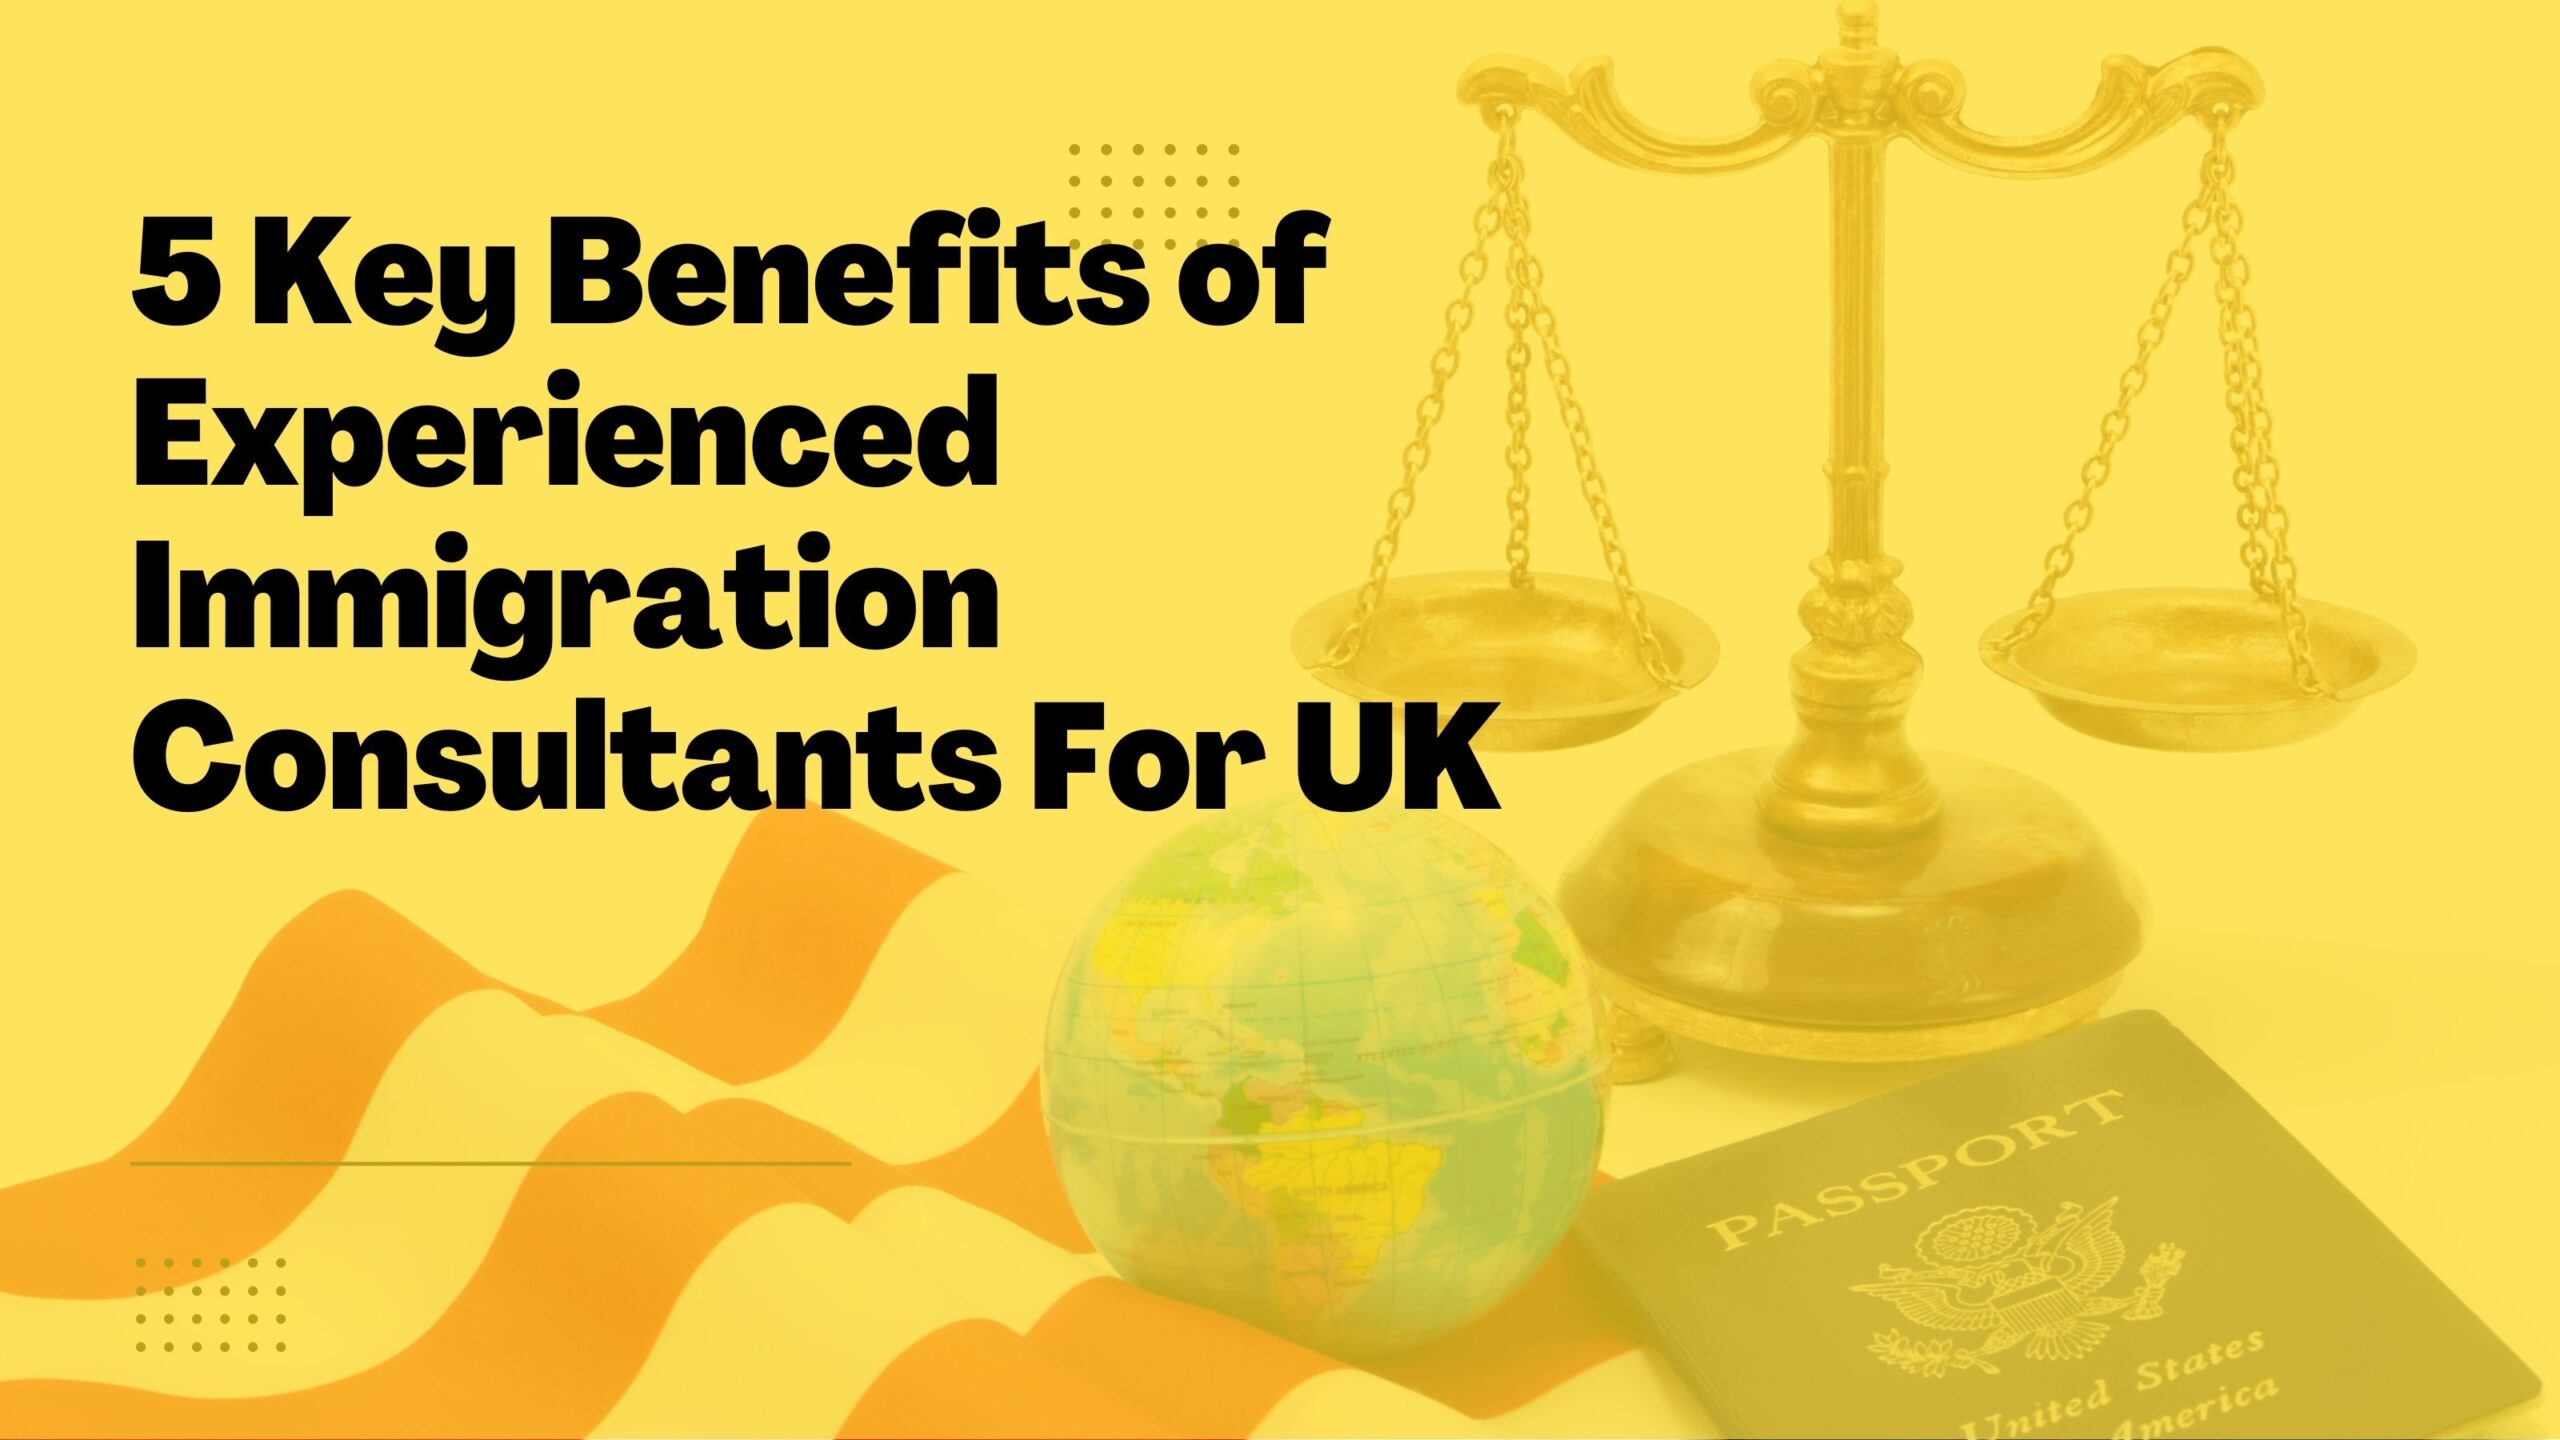 5 Key Benefits of Experienced Immigration Consultants For UK